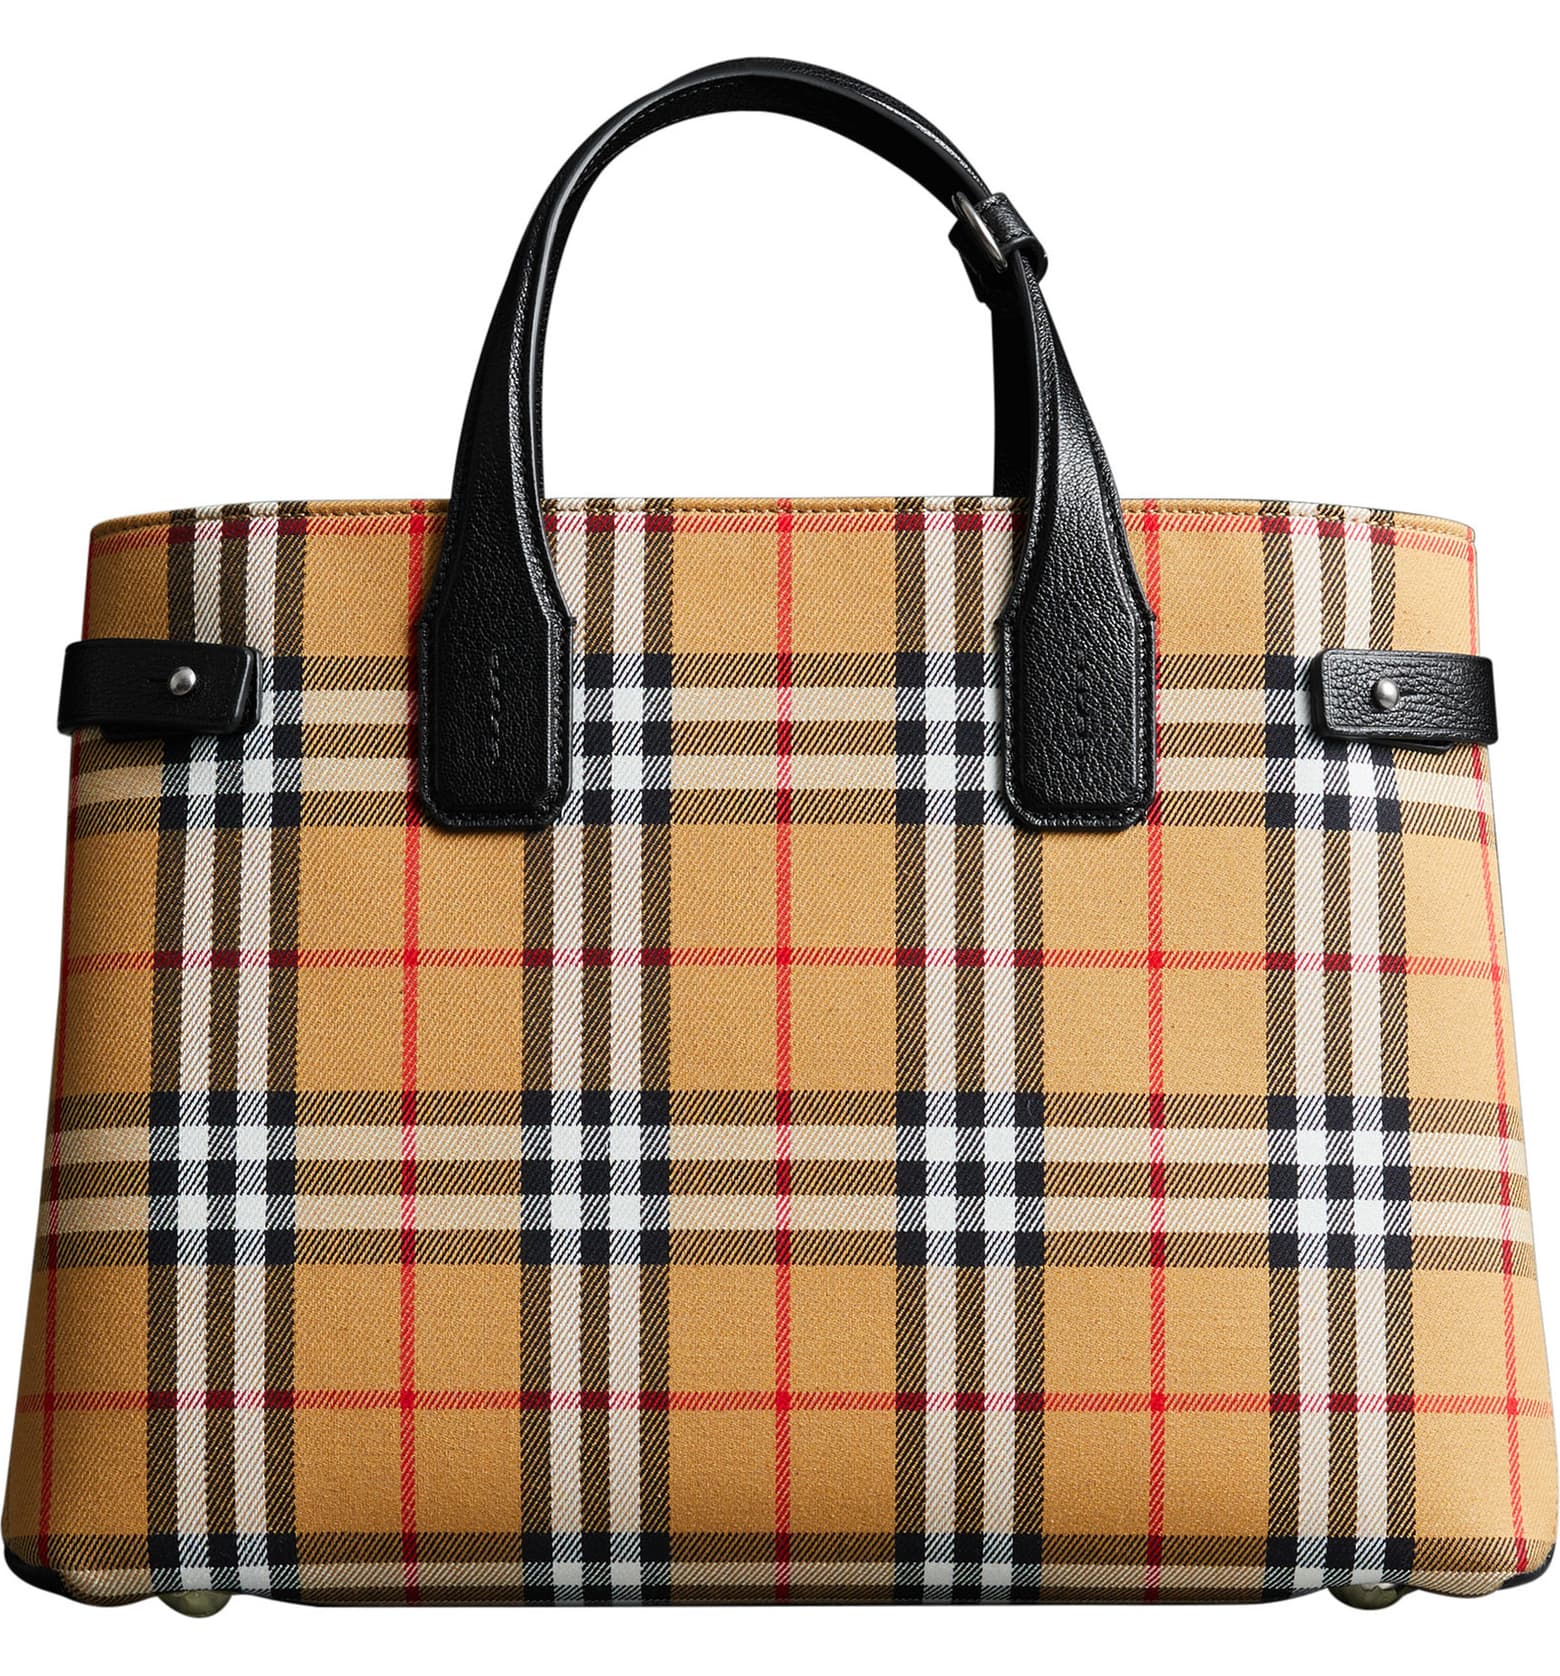 Favorite Burberry Products: 5 Classic Buys - Kelly in the City